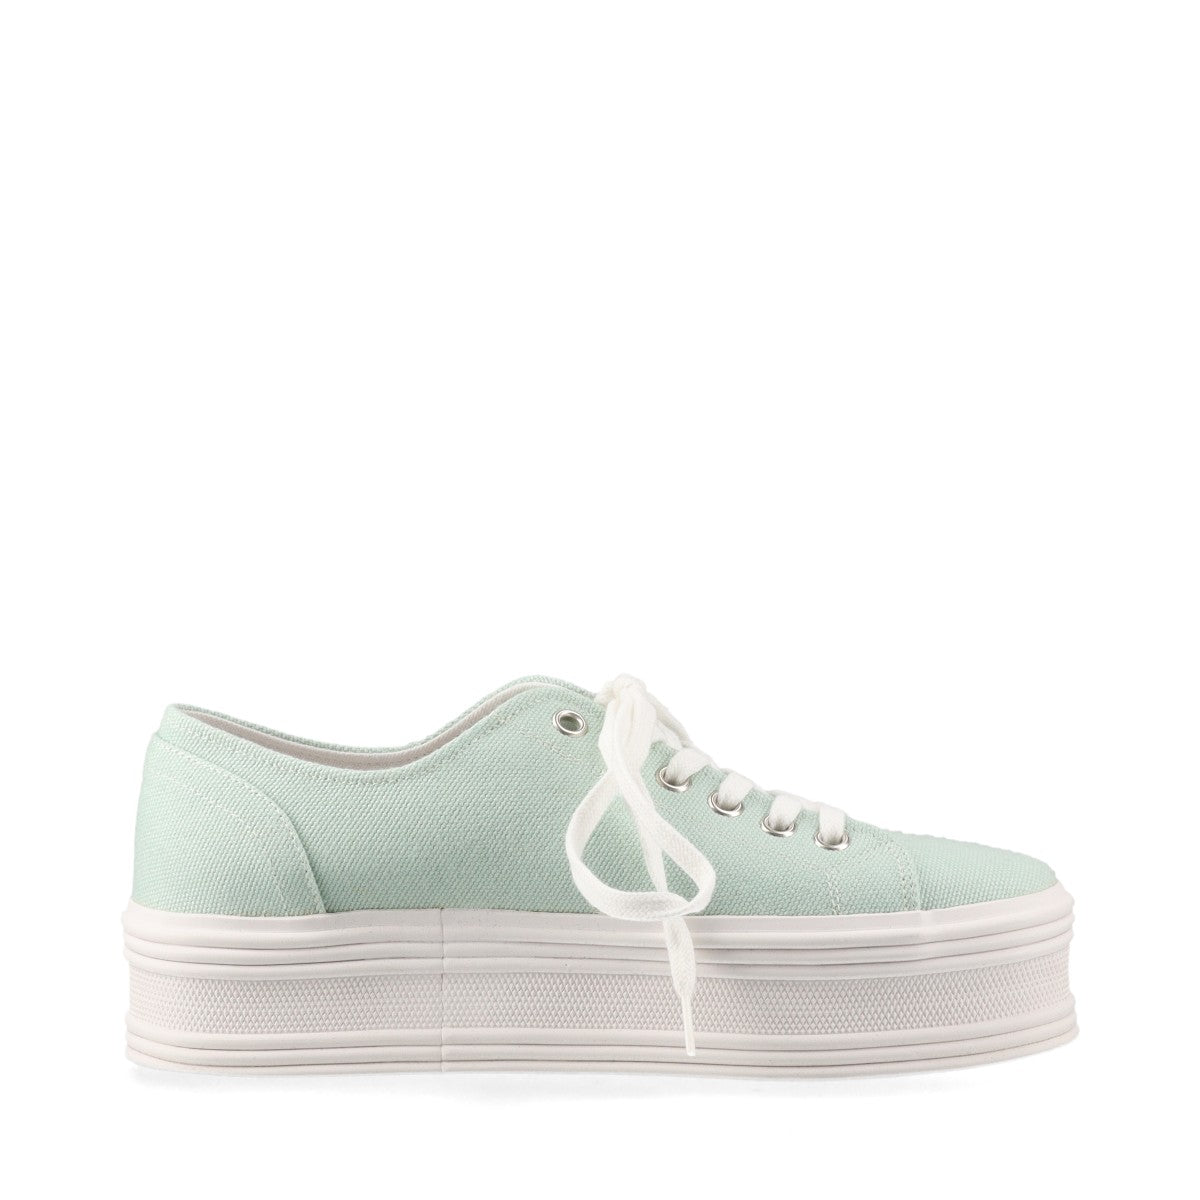 Celine  Jeanne canvas Sneakers 35 Ladies' Light Green Trion logo LK2025 Comes with box